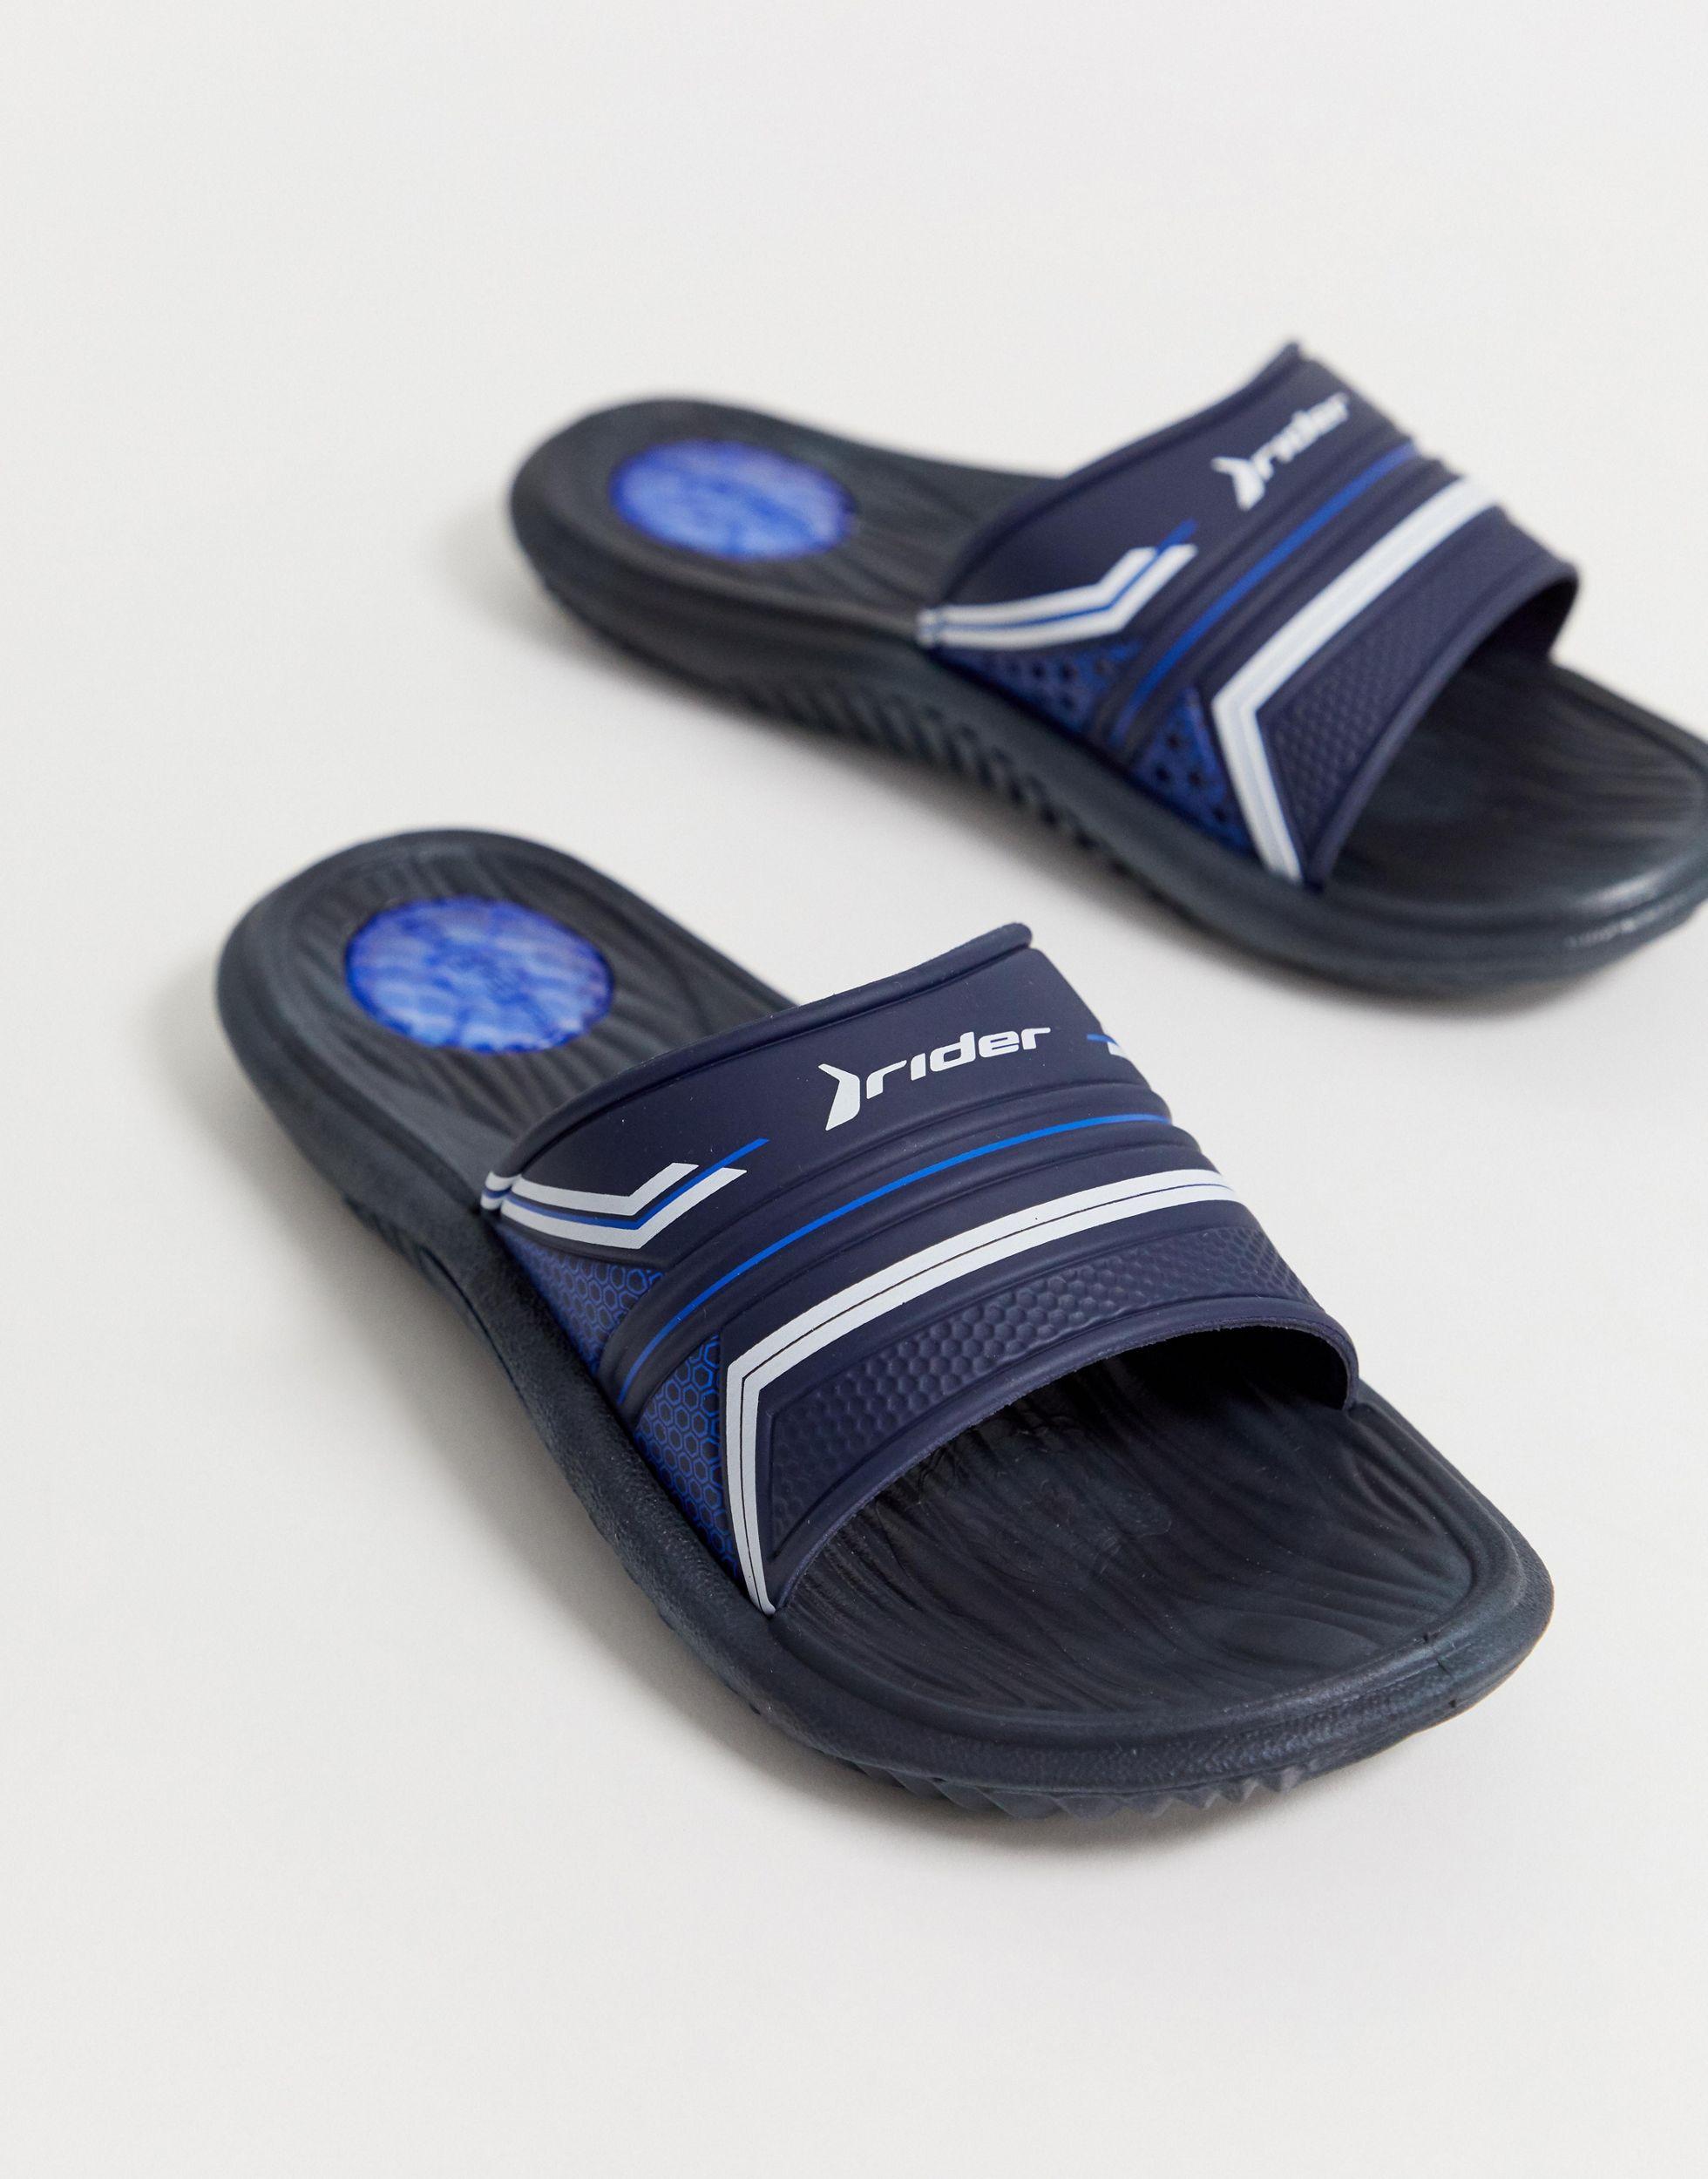 Rider Sandals White & Black Duo Plus Flip-Flop - Men | Best Price and  Reviews | Zulily